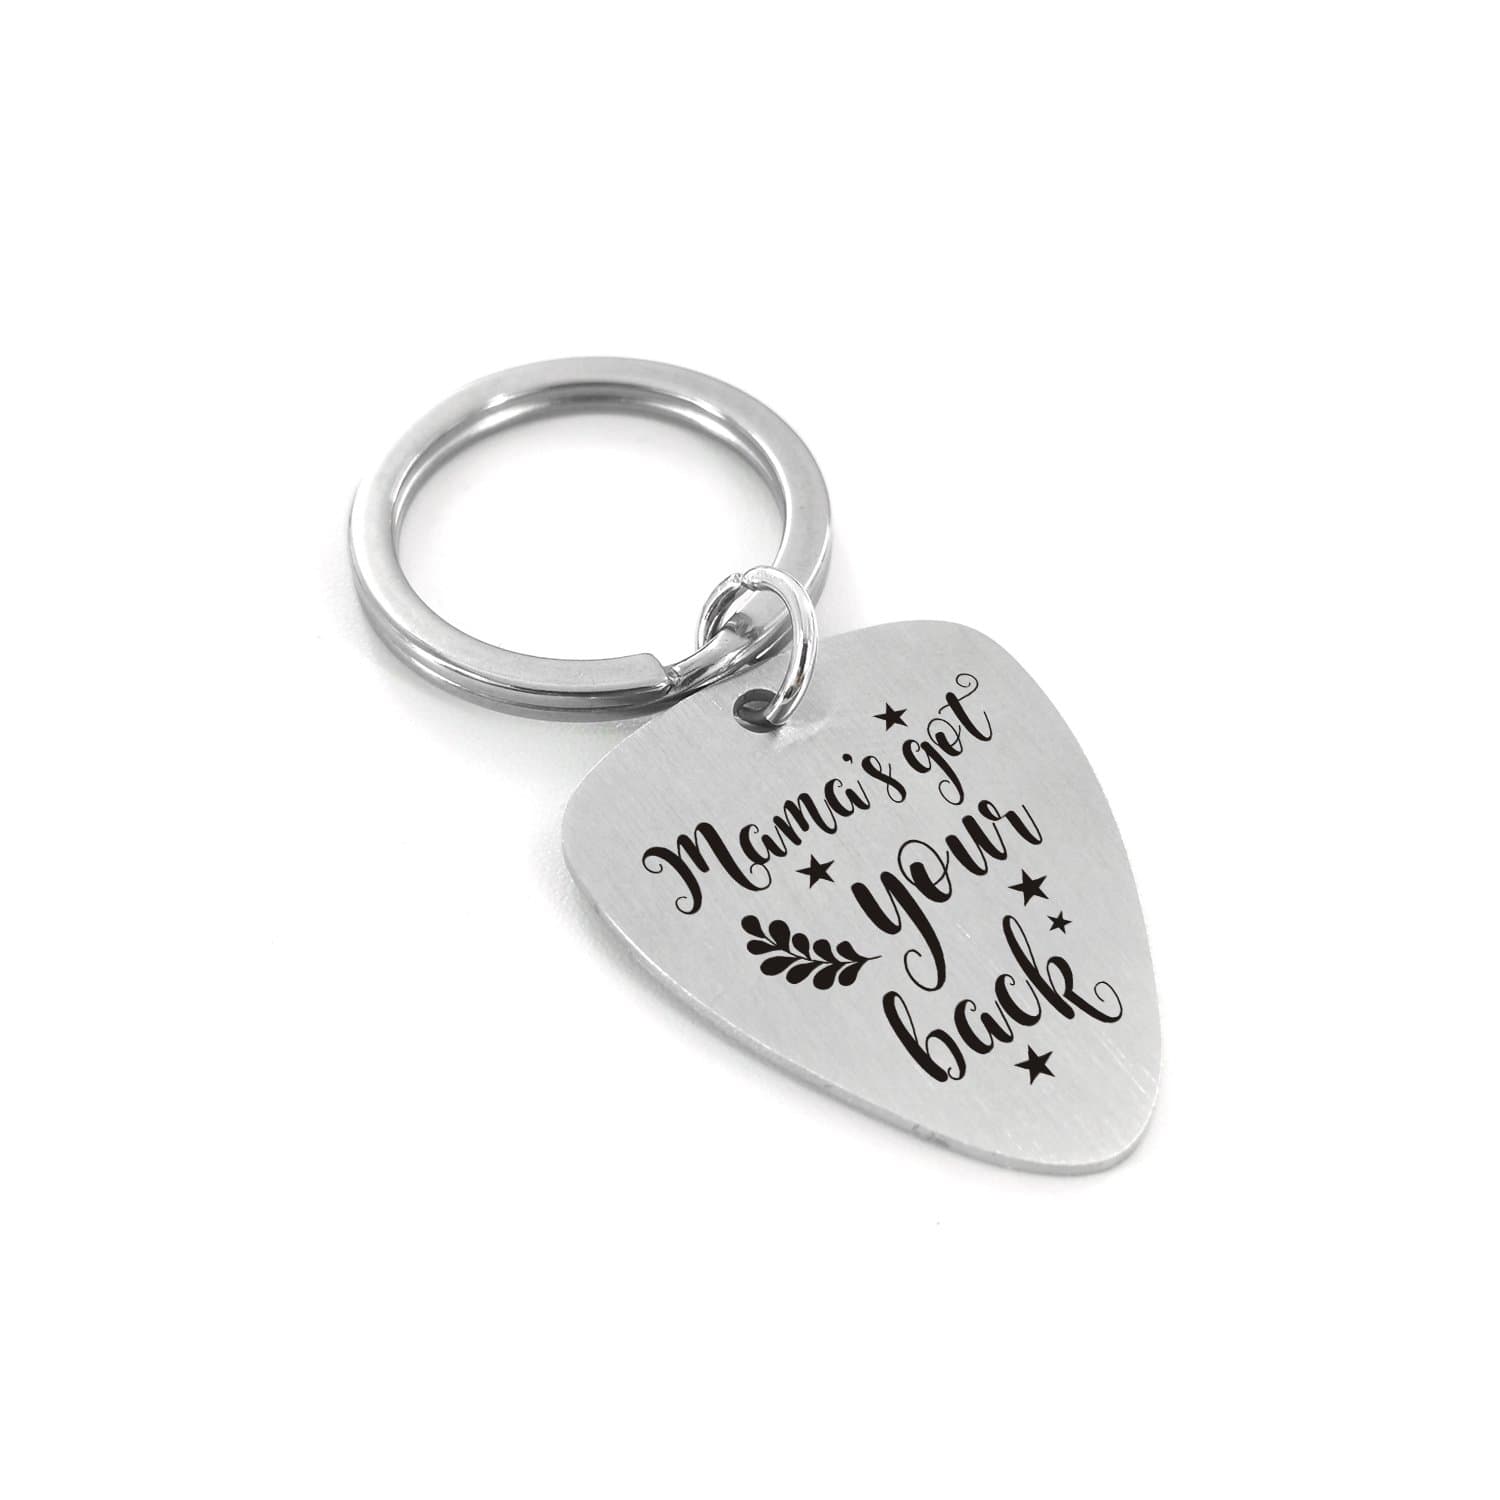 Guitar Pick Keychains Mama's Got Your Back - Customized Guitar Pick Keychain GiveMe-Gifts